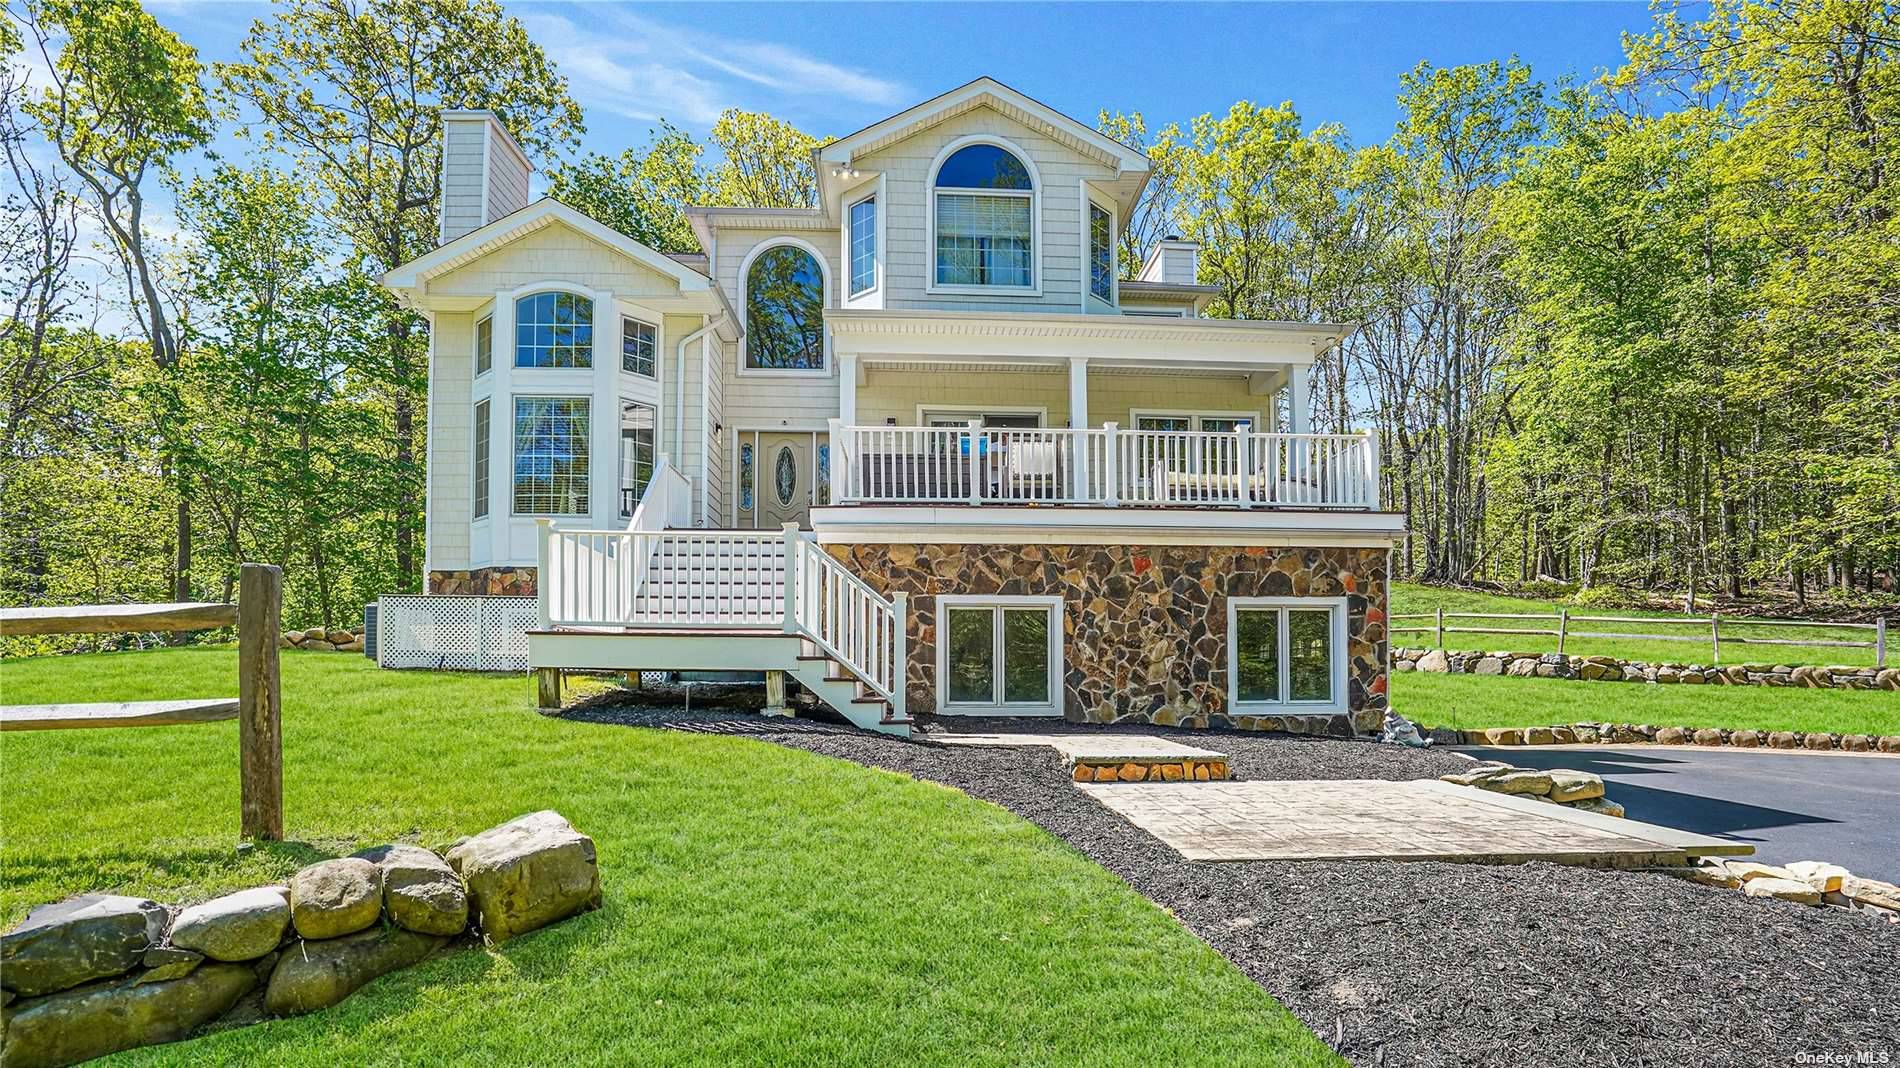 Secluded upon an acre of property, high above the tree tops in the heart of Wading River is this spectacular custom built diamond postmodern home.